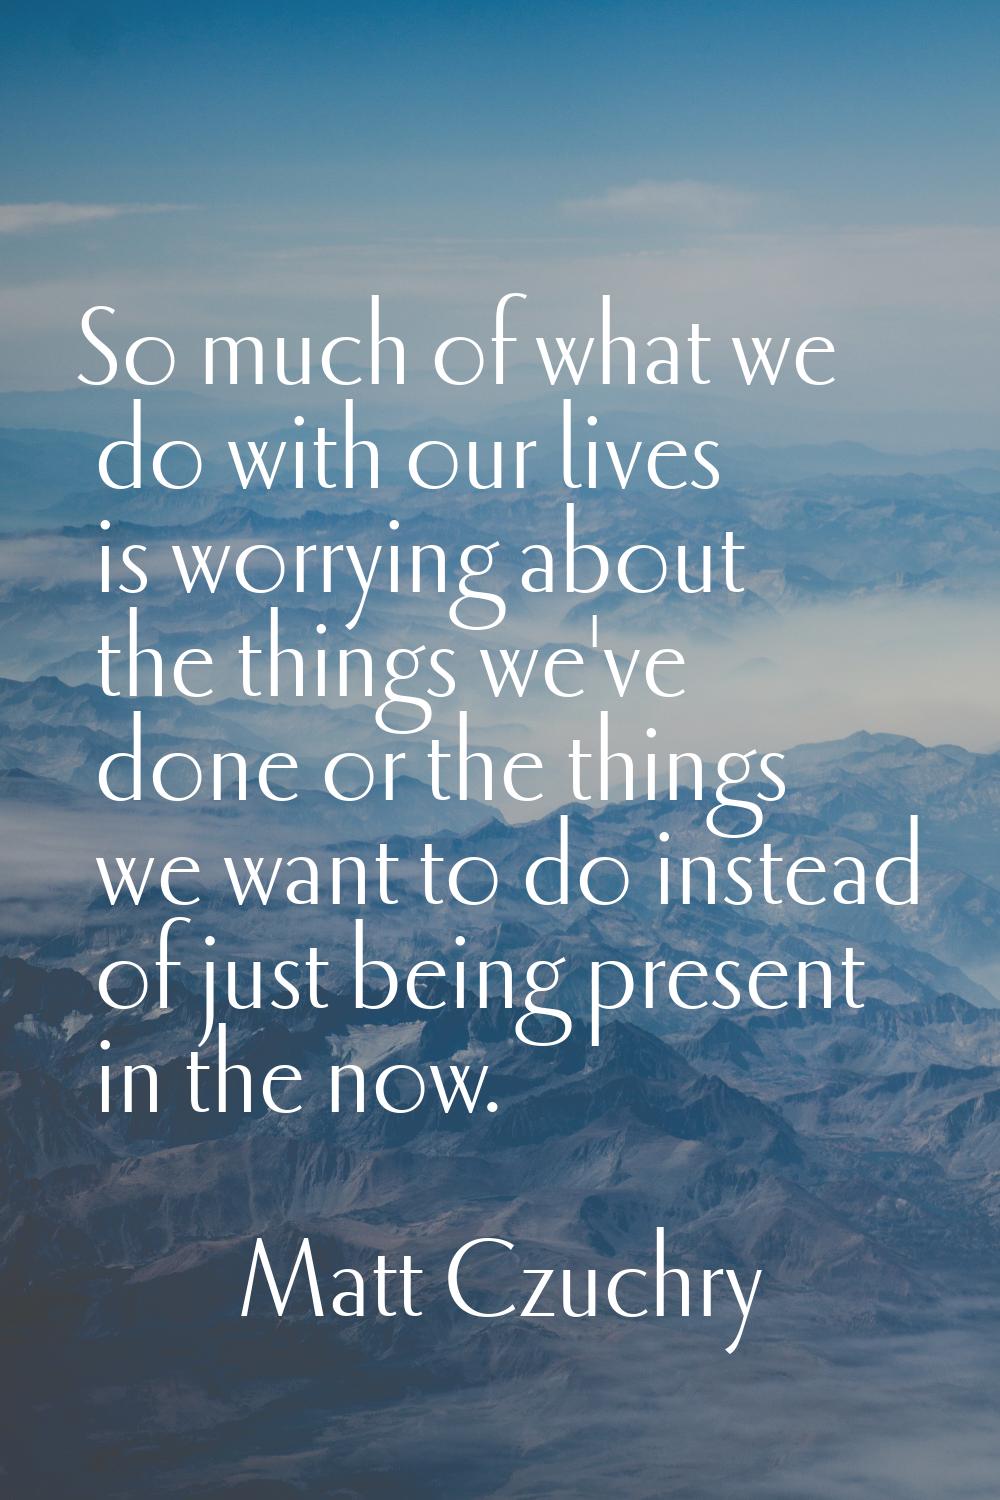 So much of what we do with our lives is worrying about the things we've done or the things we want 